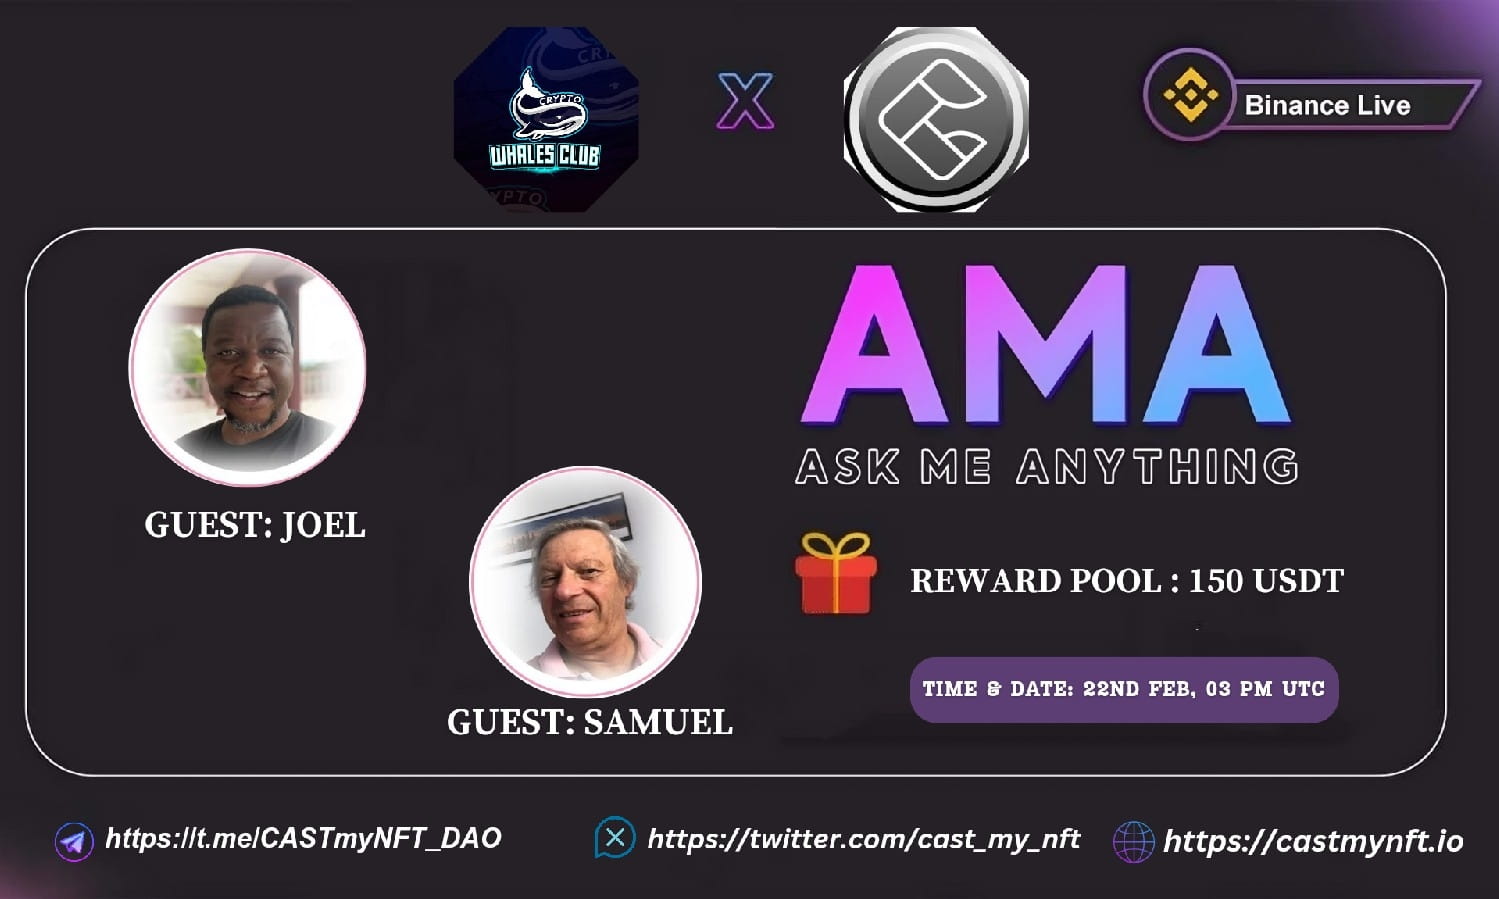 Crypto Whales Club AMA with CASTmyNFT |  22nd February 